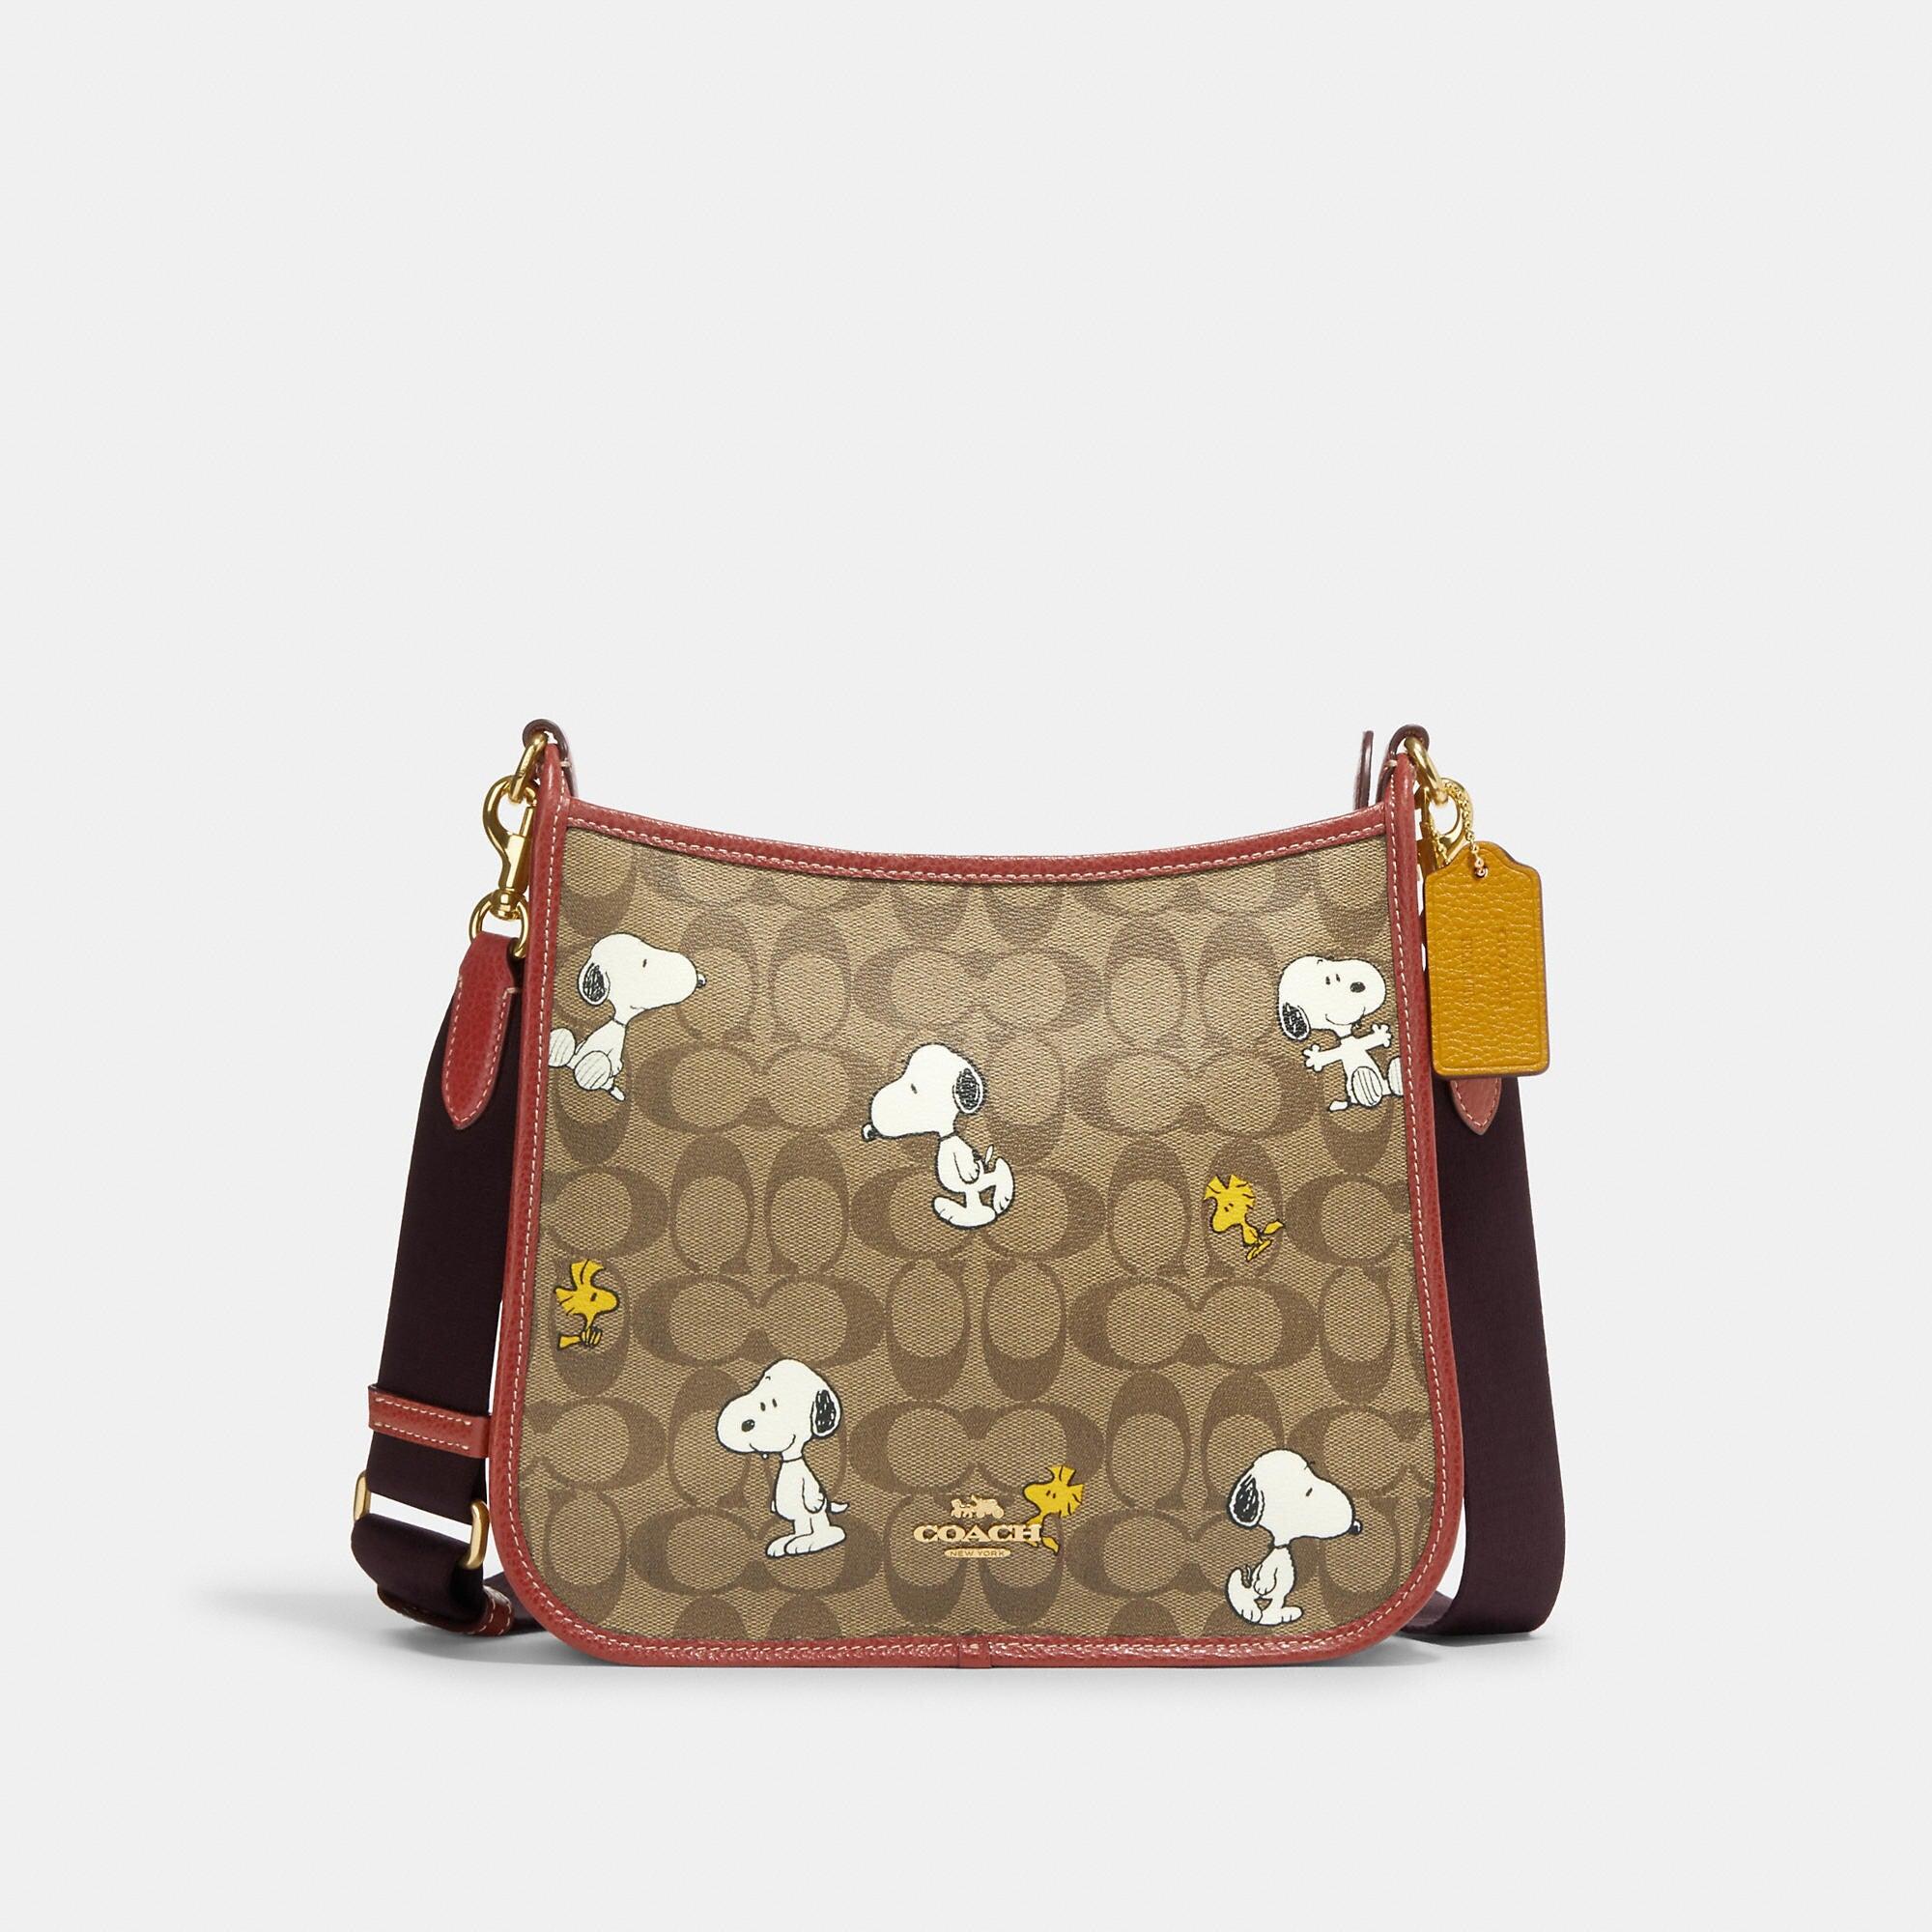 Coach Outlet Disney x Coach Mini Dempsey Bucket Bag in Signature Jacquard with Mickey Mouse Print - Multi